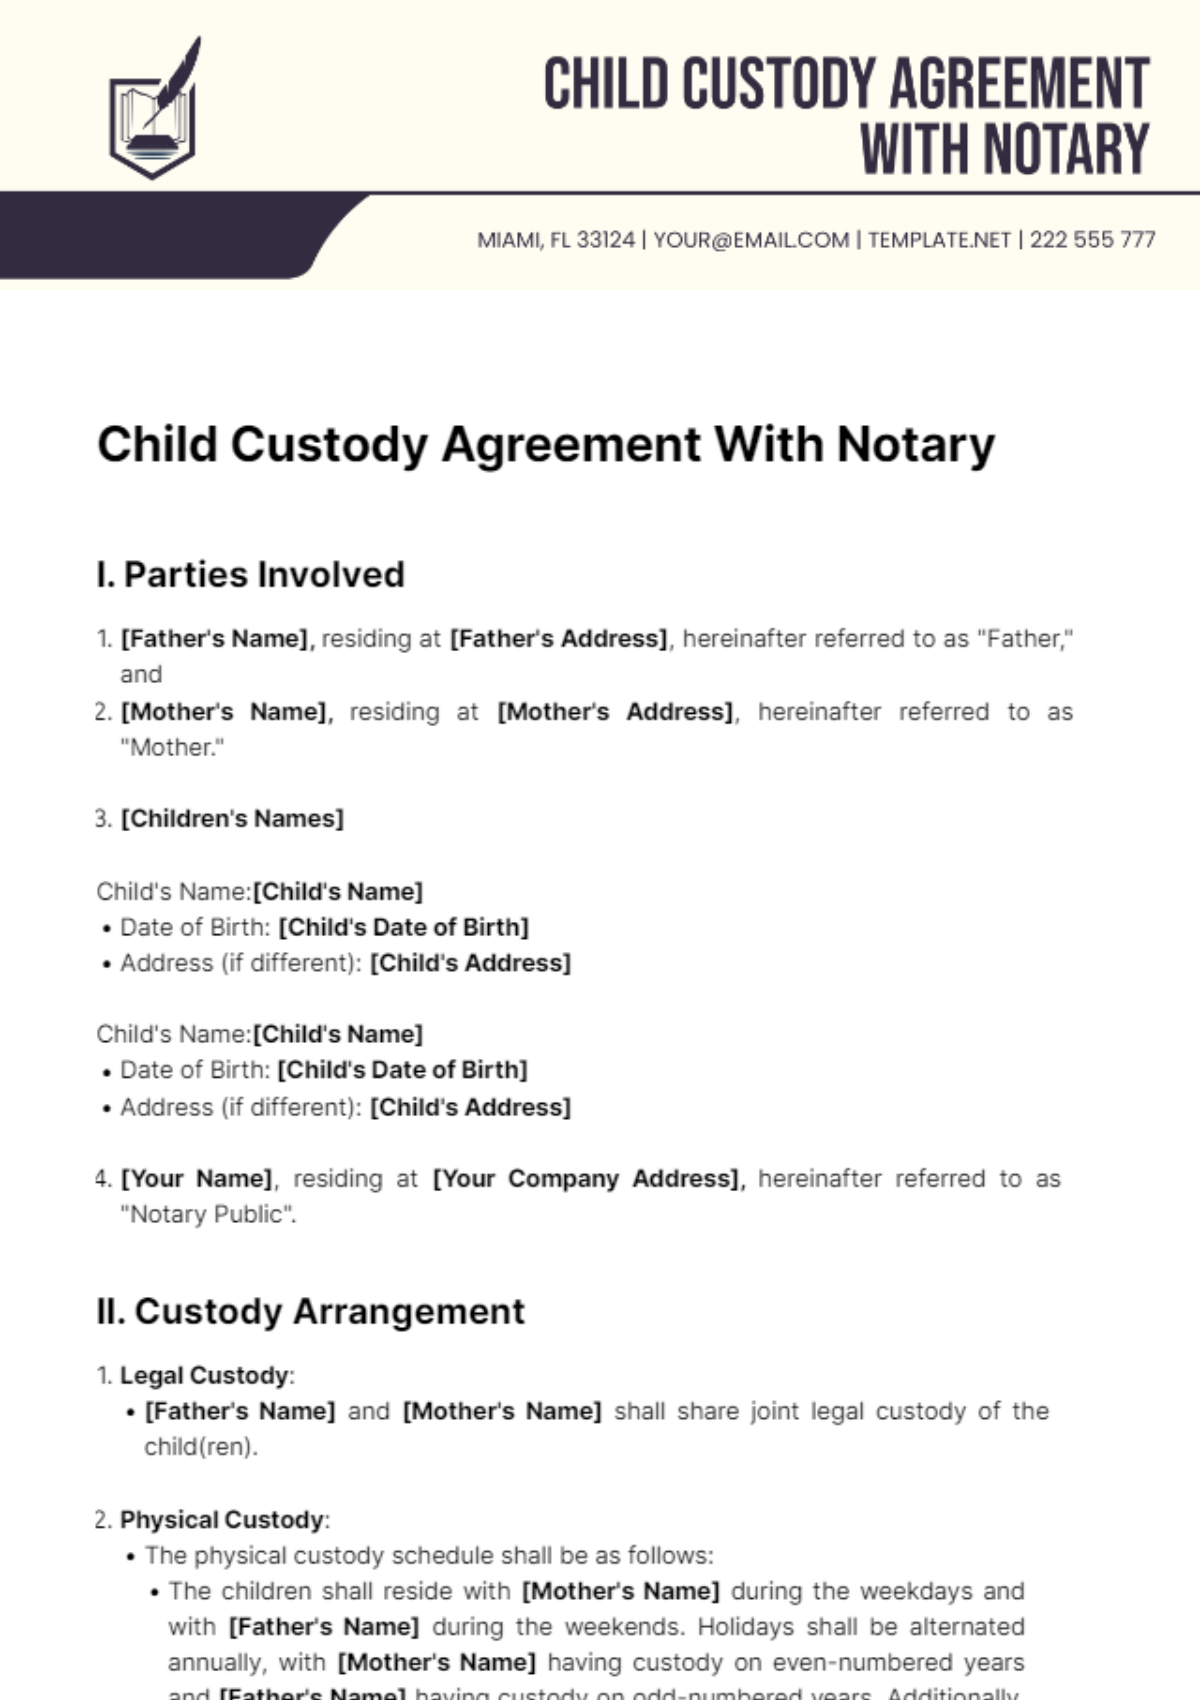 Child Custody Agreement With Notary Template